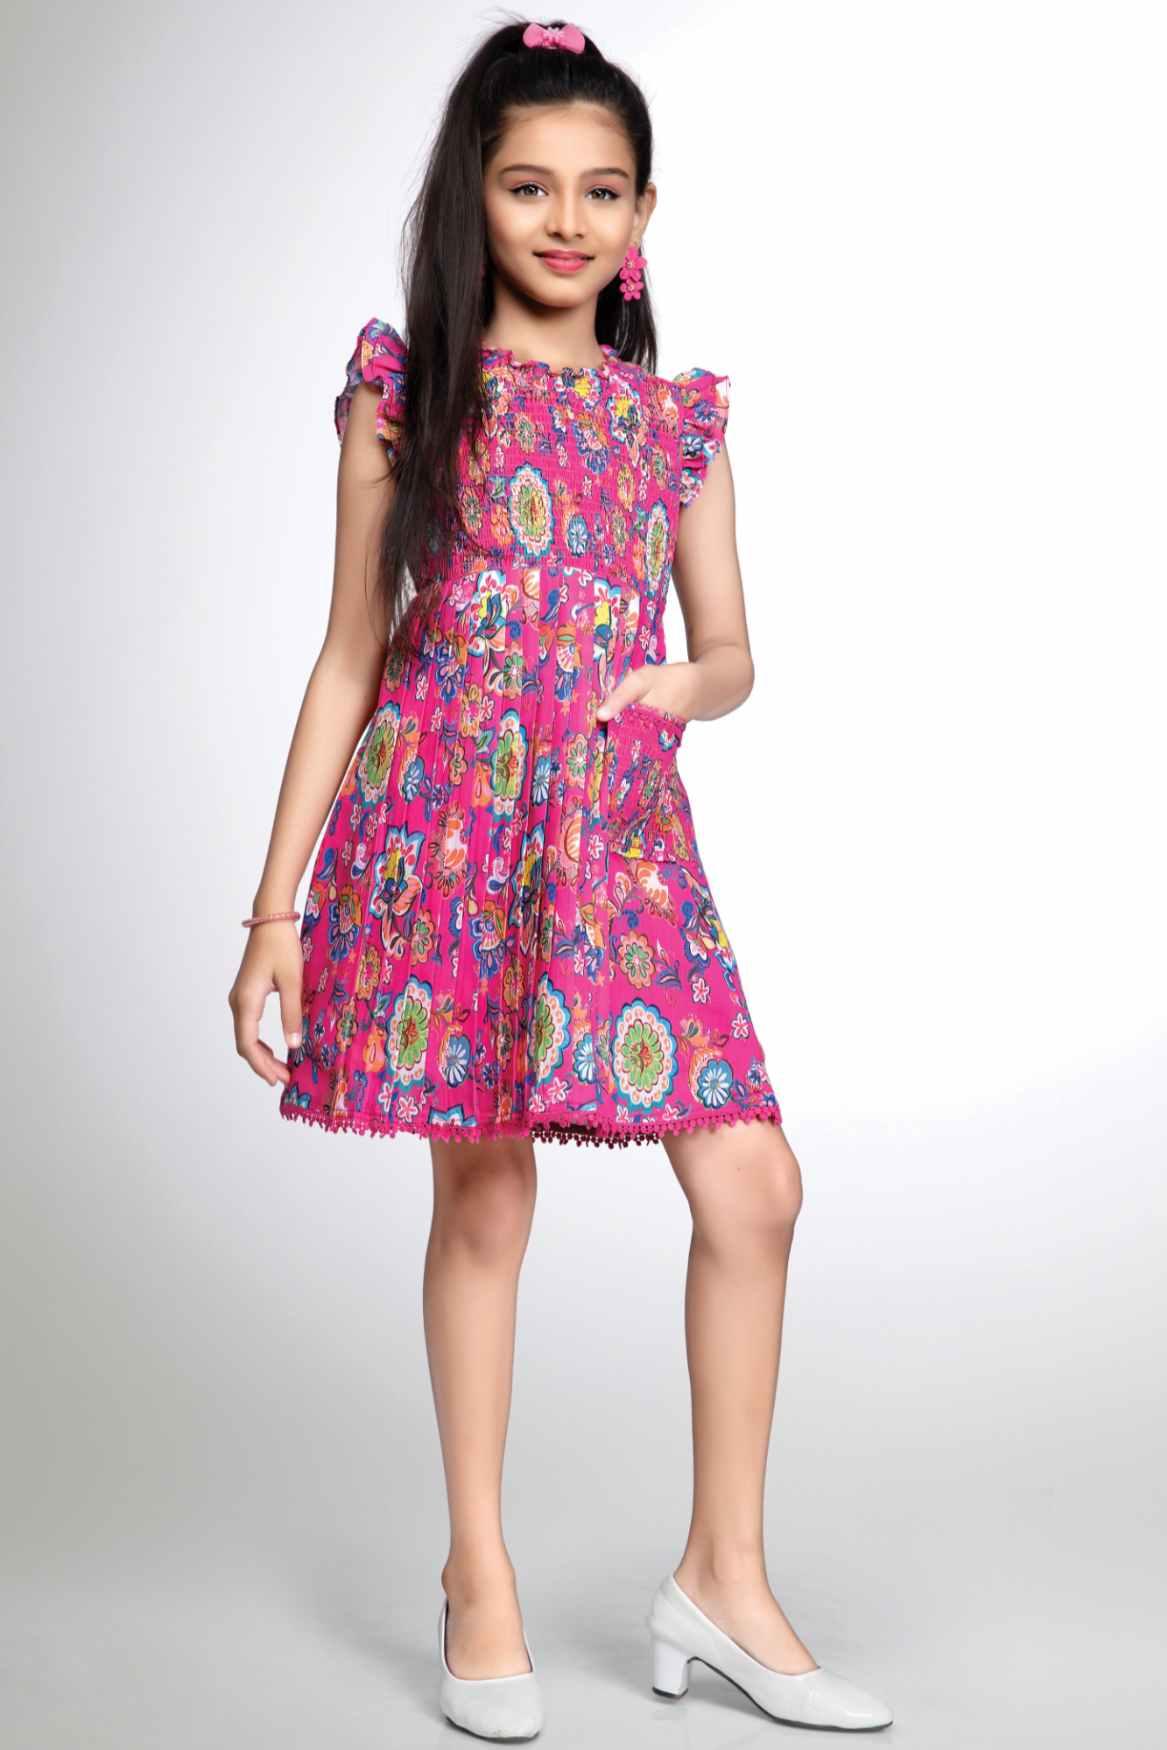 Pink Floral Cotton Frock With Pleats Pattern And Pockets For Girls - Lagorii Kids